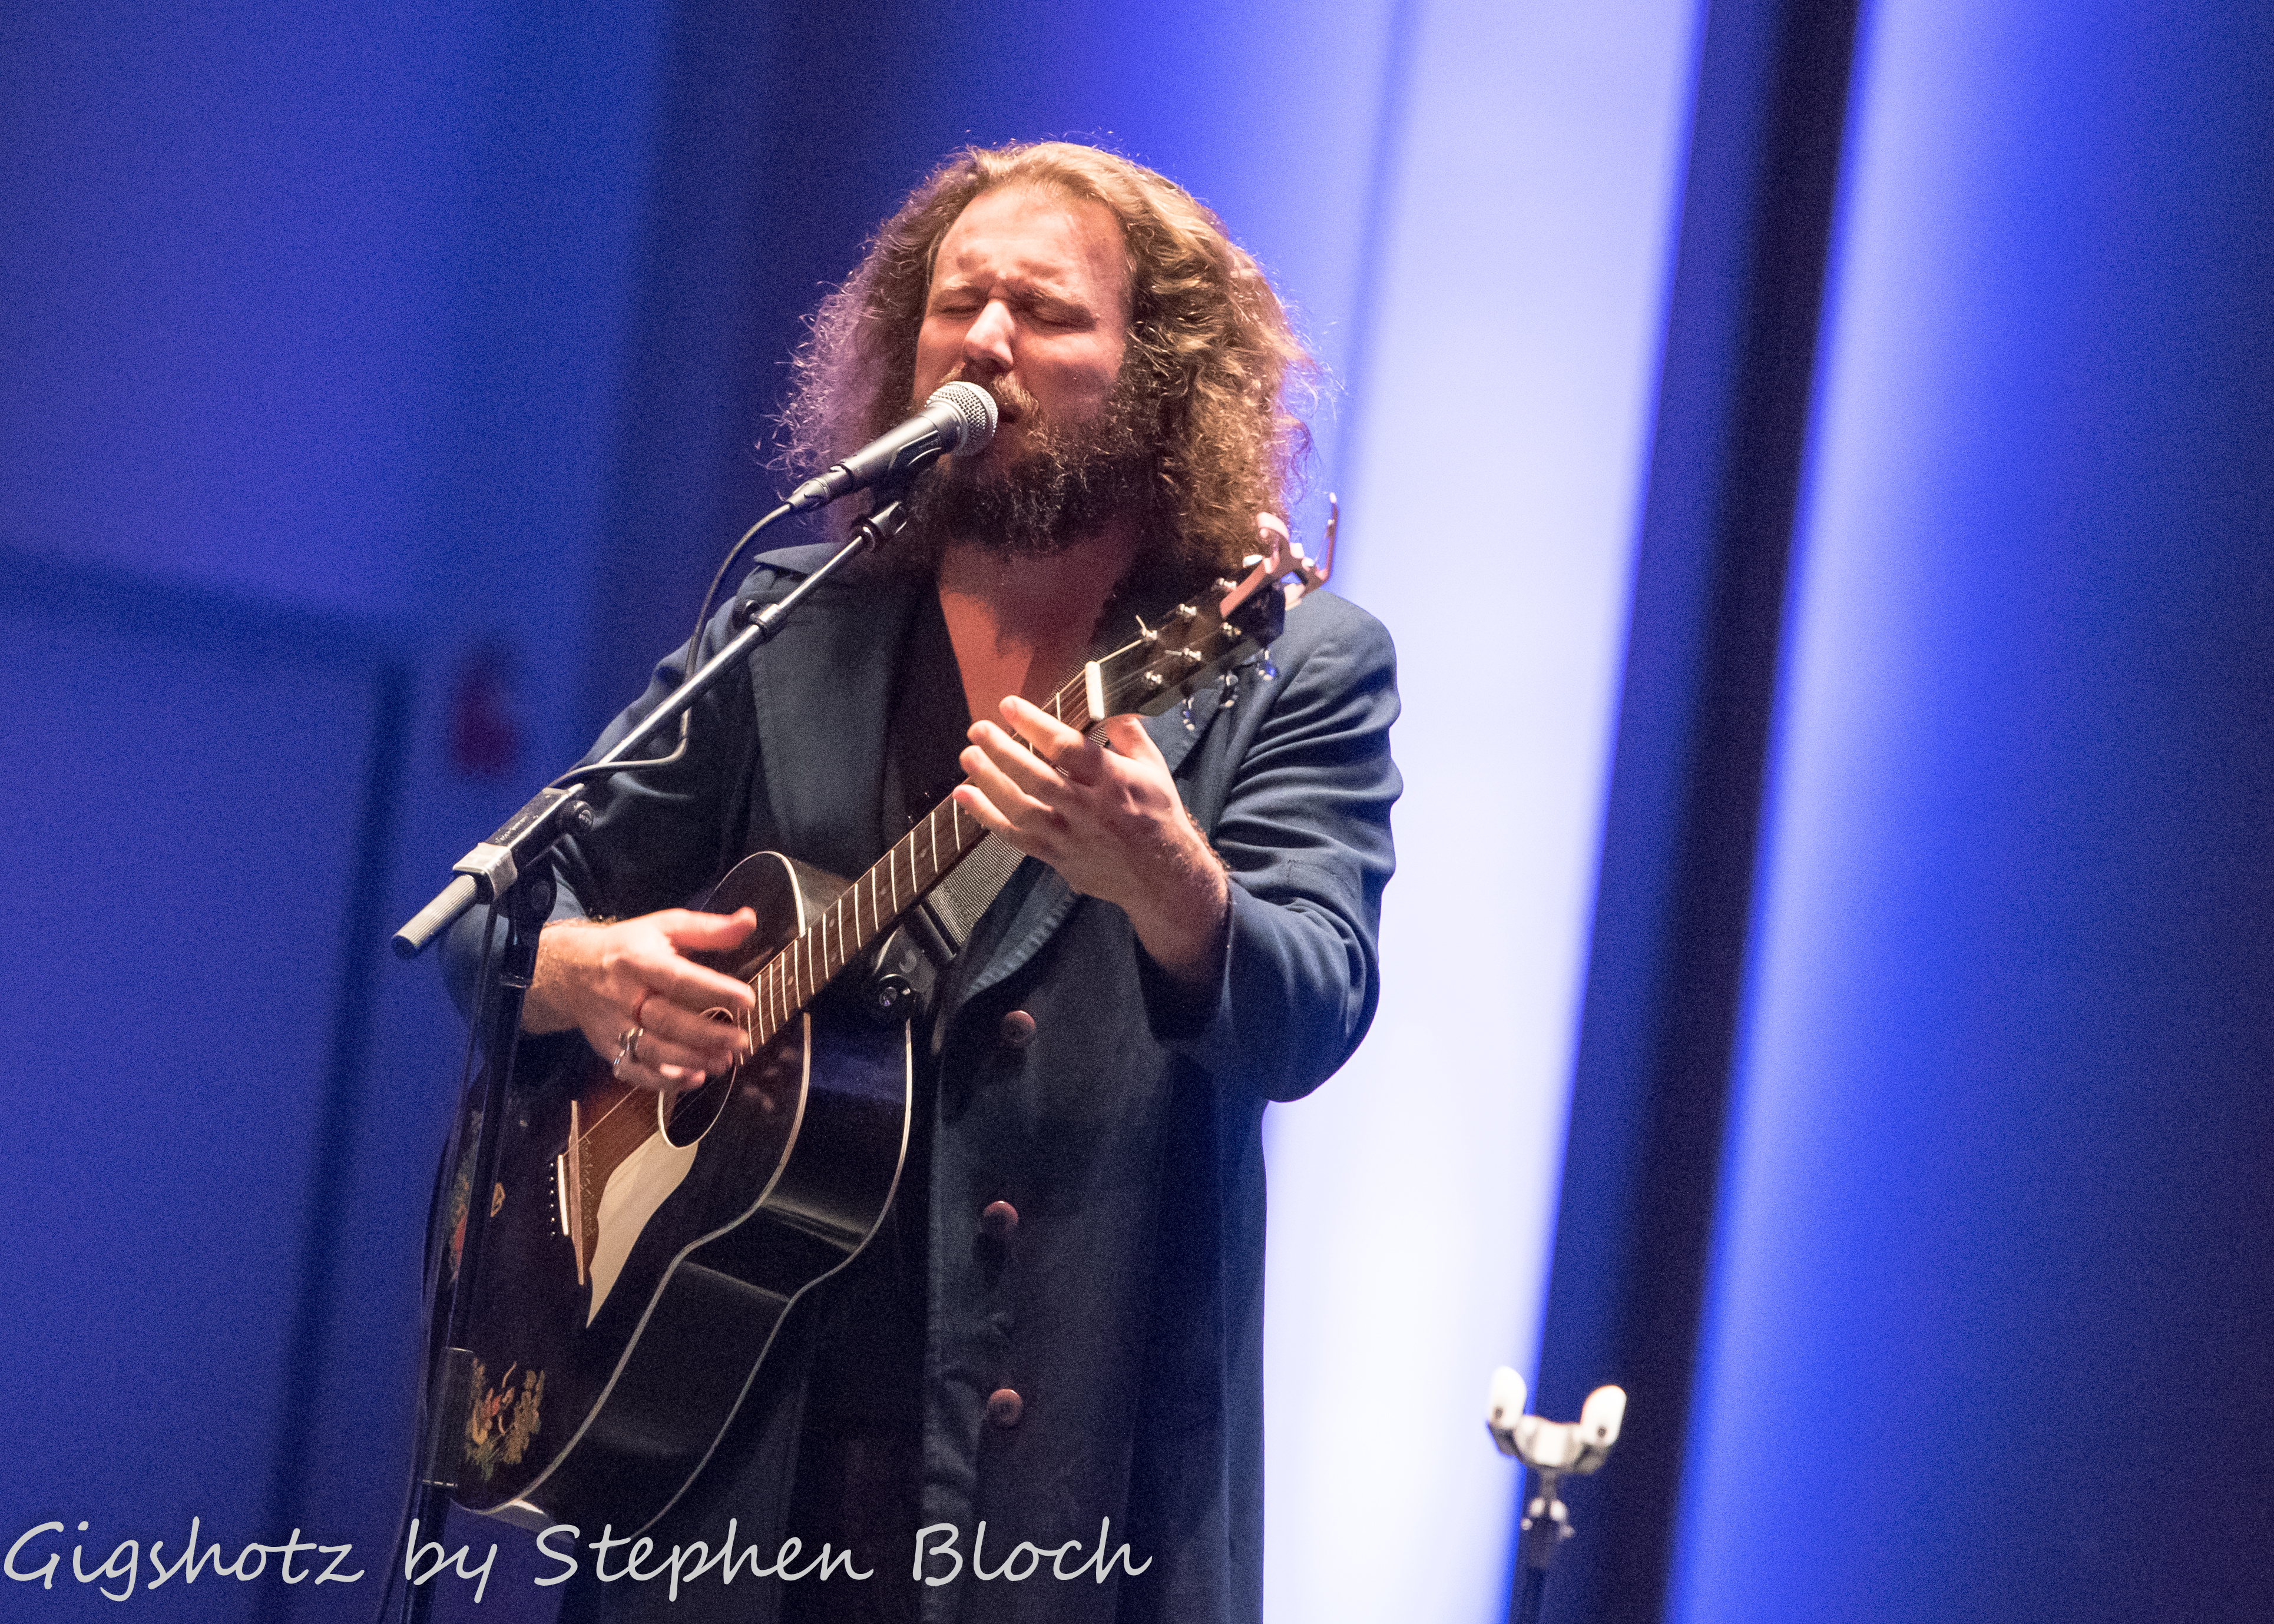 Full Video and Photos: Jim James and More Play “The Future Is Voting” Event in Milwaukee